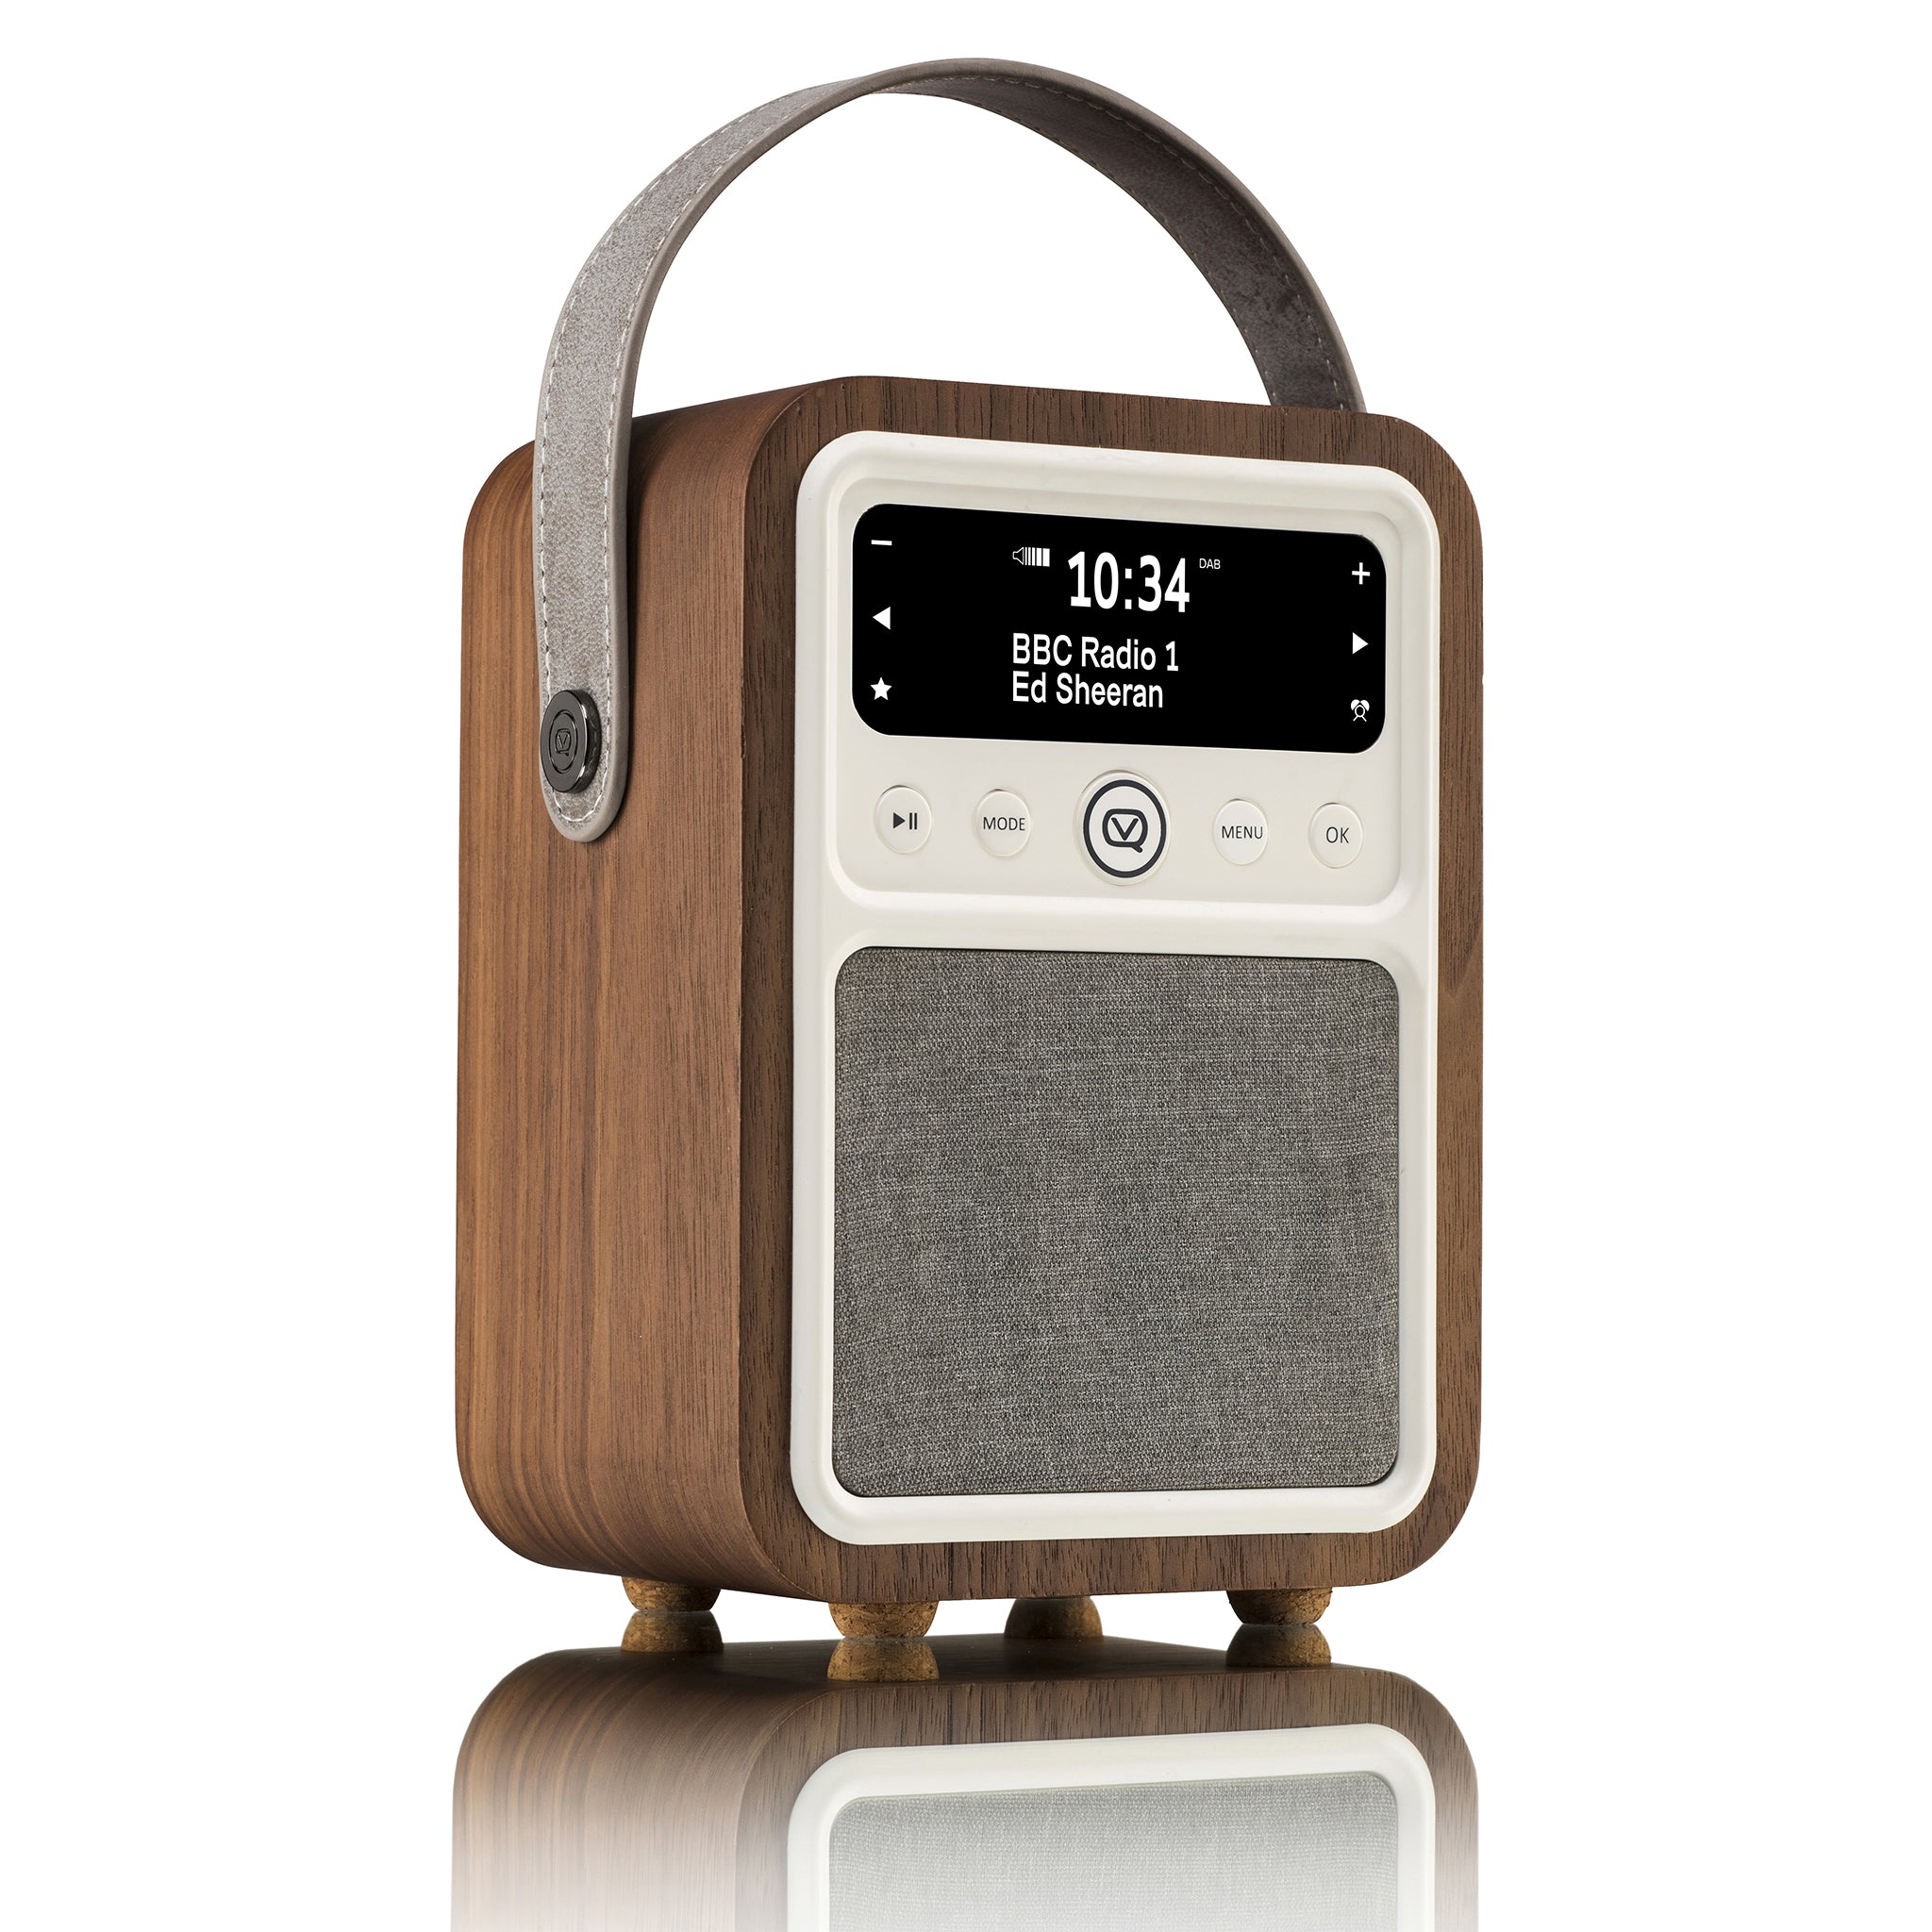 The MYVQ Monty is a beautifully modern styled DAB/DAB+ digital radio and Bluetooth speaker featuring a premium real wood case in a choice of finishes.